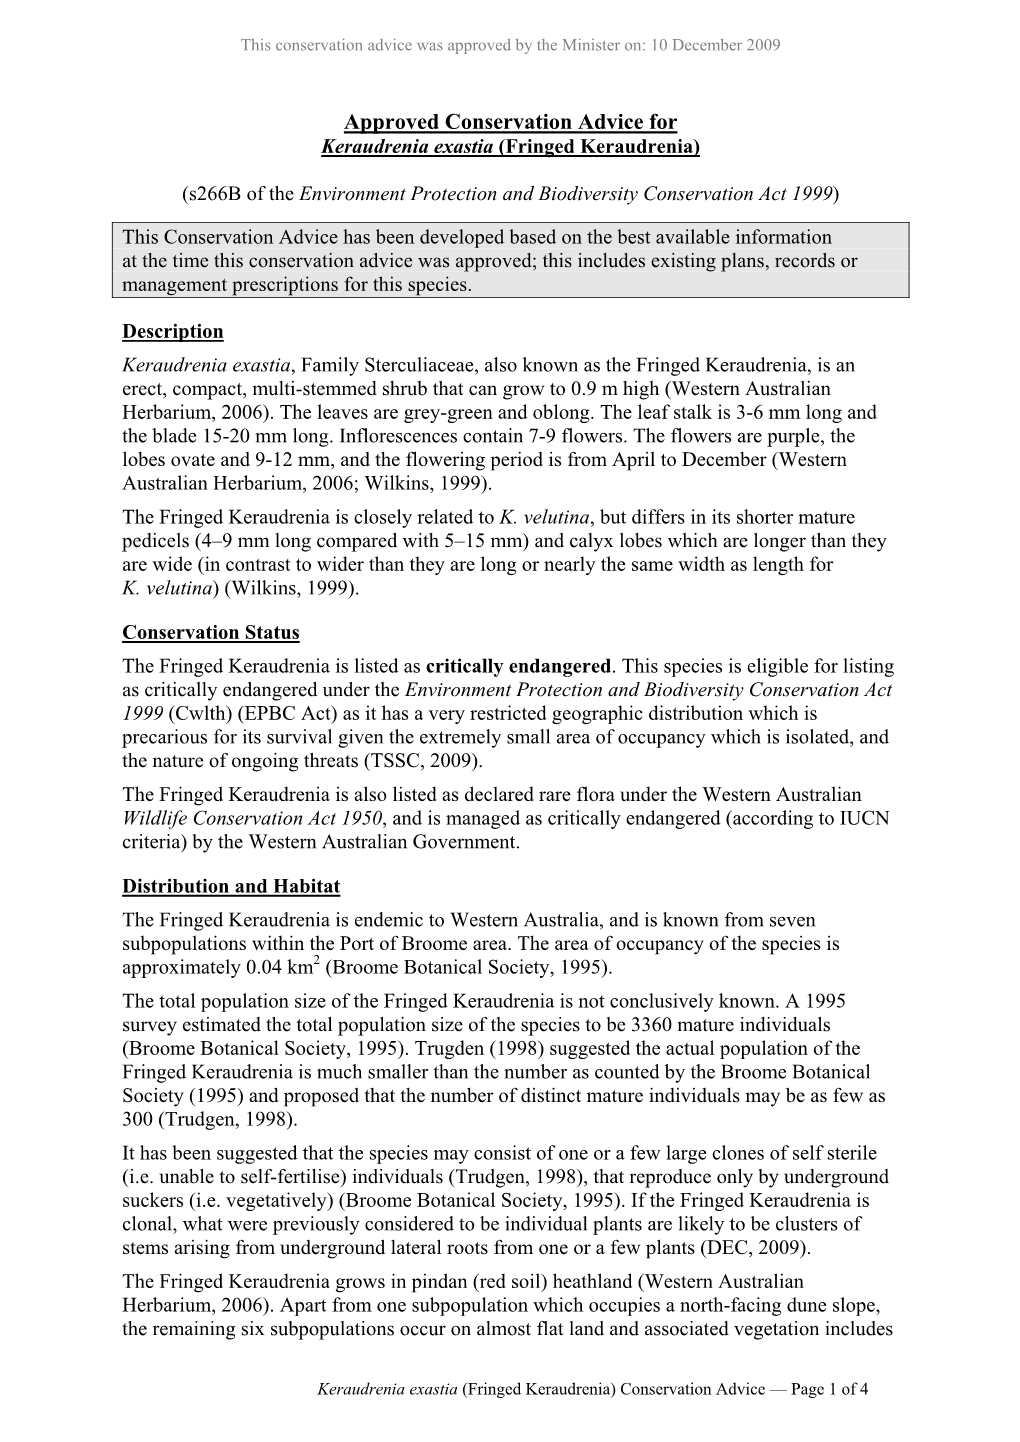 Keraudrenia Exastia (Fringed Keraudrenia) Conservation Advice — Page 1 of 4 This Conservation Advice Was Approved by the Minister On: 10 December 2009